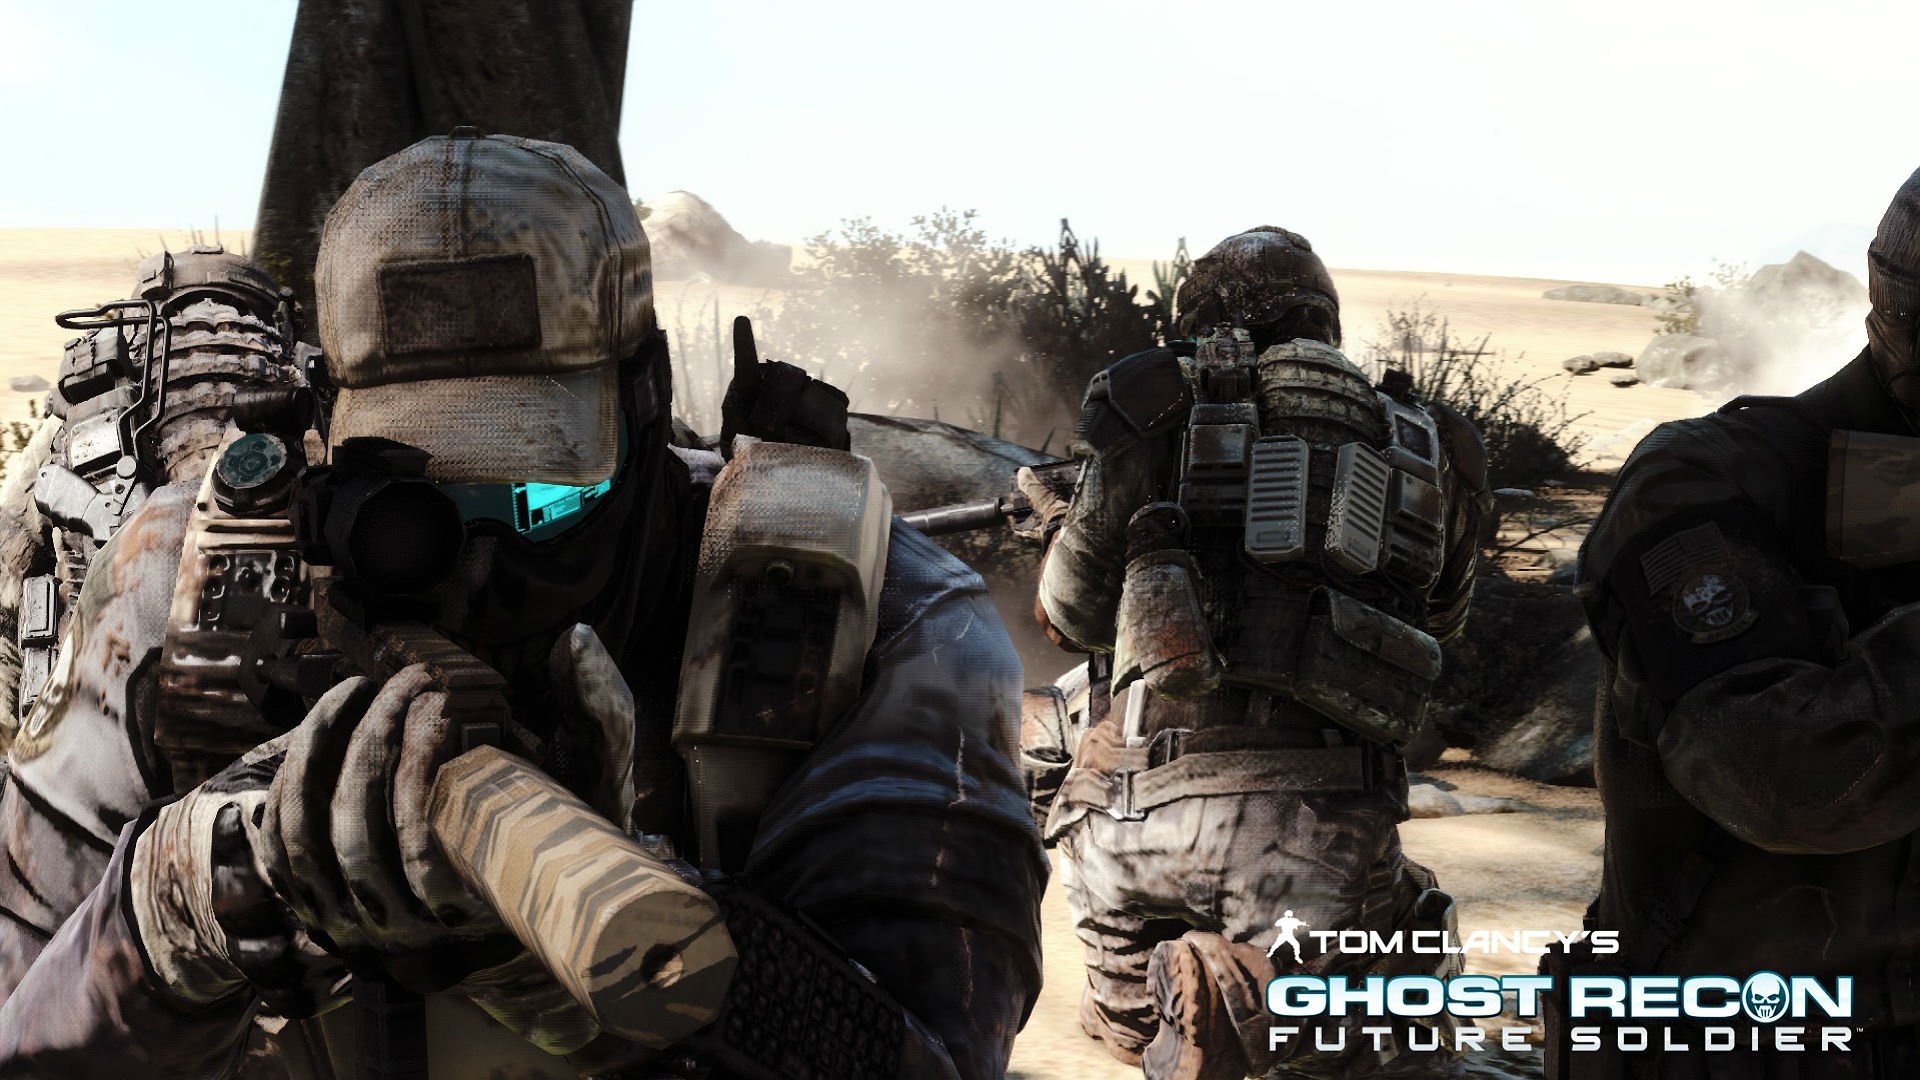 1920x1080 High Quality Ghost Recon Future Soldier Wallpaper Full HD Pictures